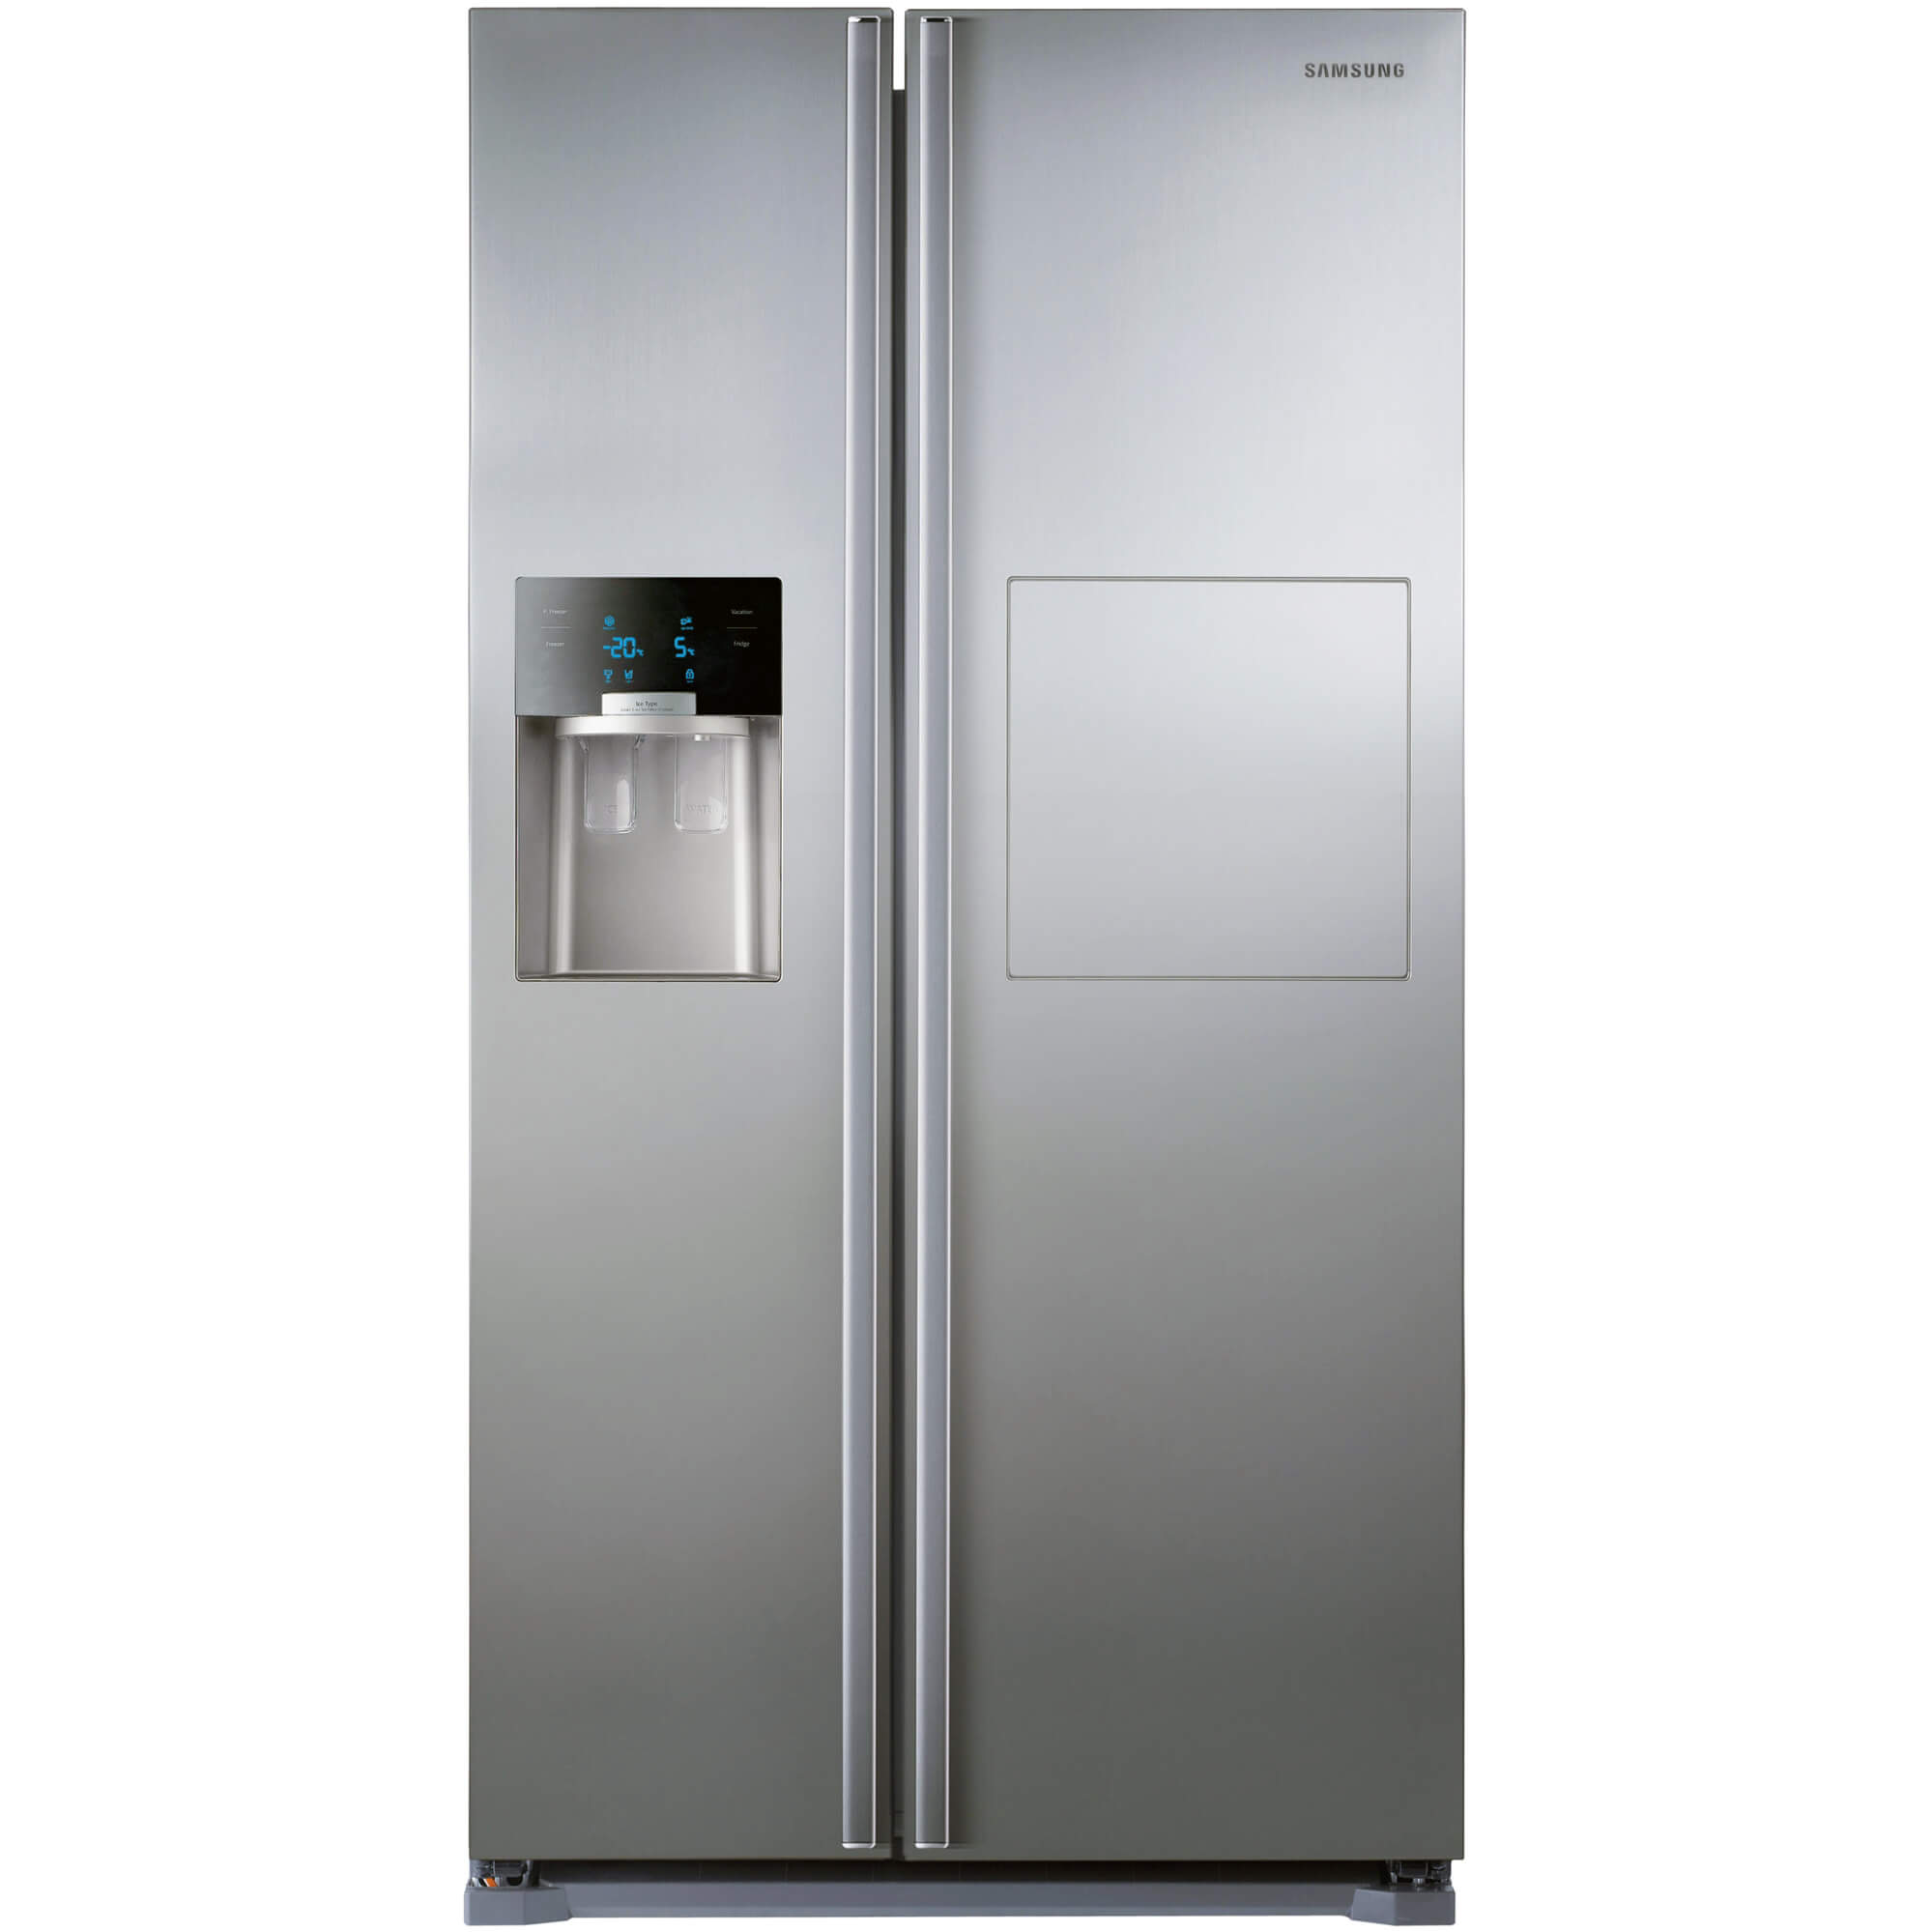  Side by side Samsung RS7577THCSP, 530 l, Clasa A+, Inox 